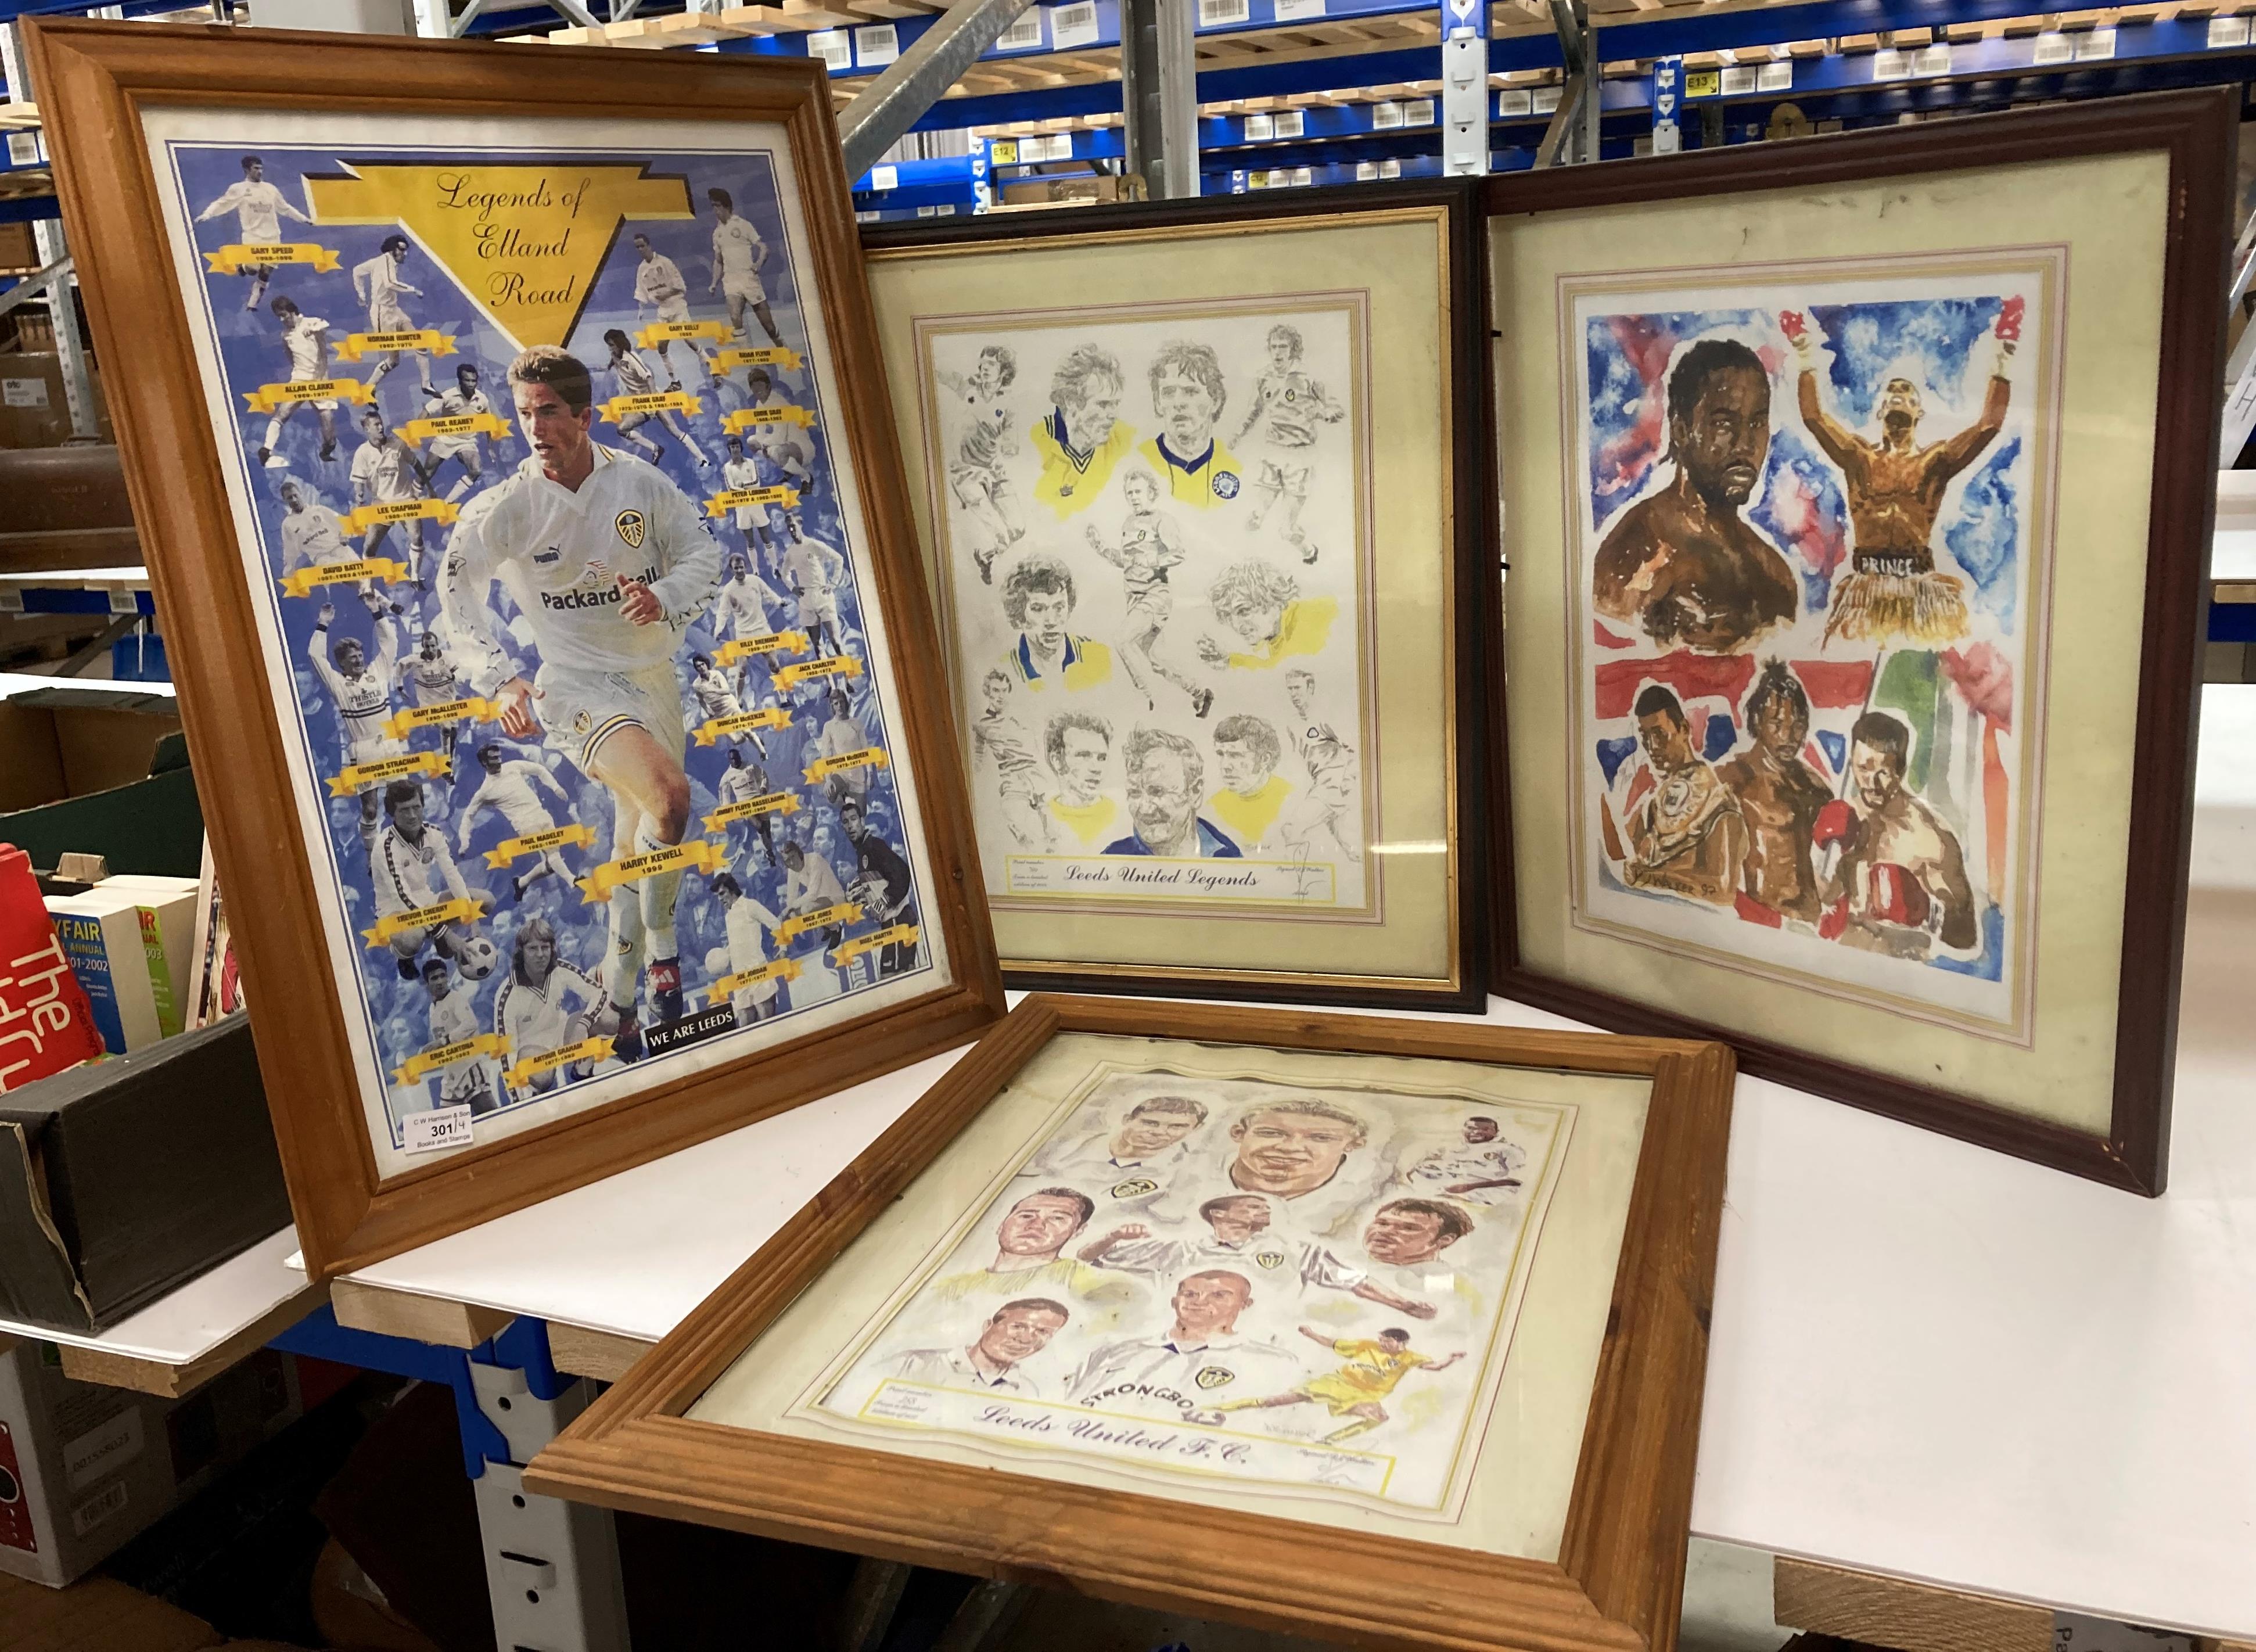 Leeds United and boxing related - a framed legends of Elland Road print 60cm x 40cm,